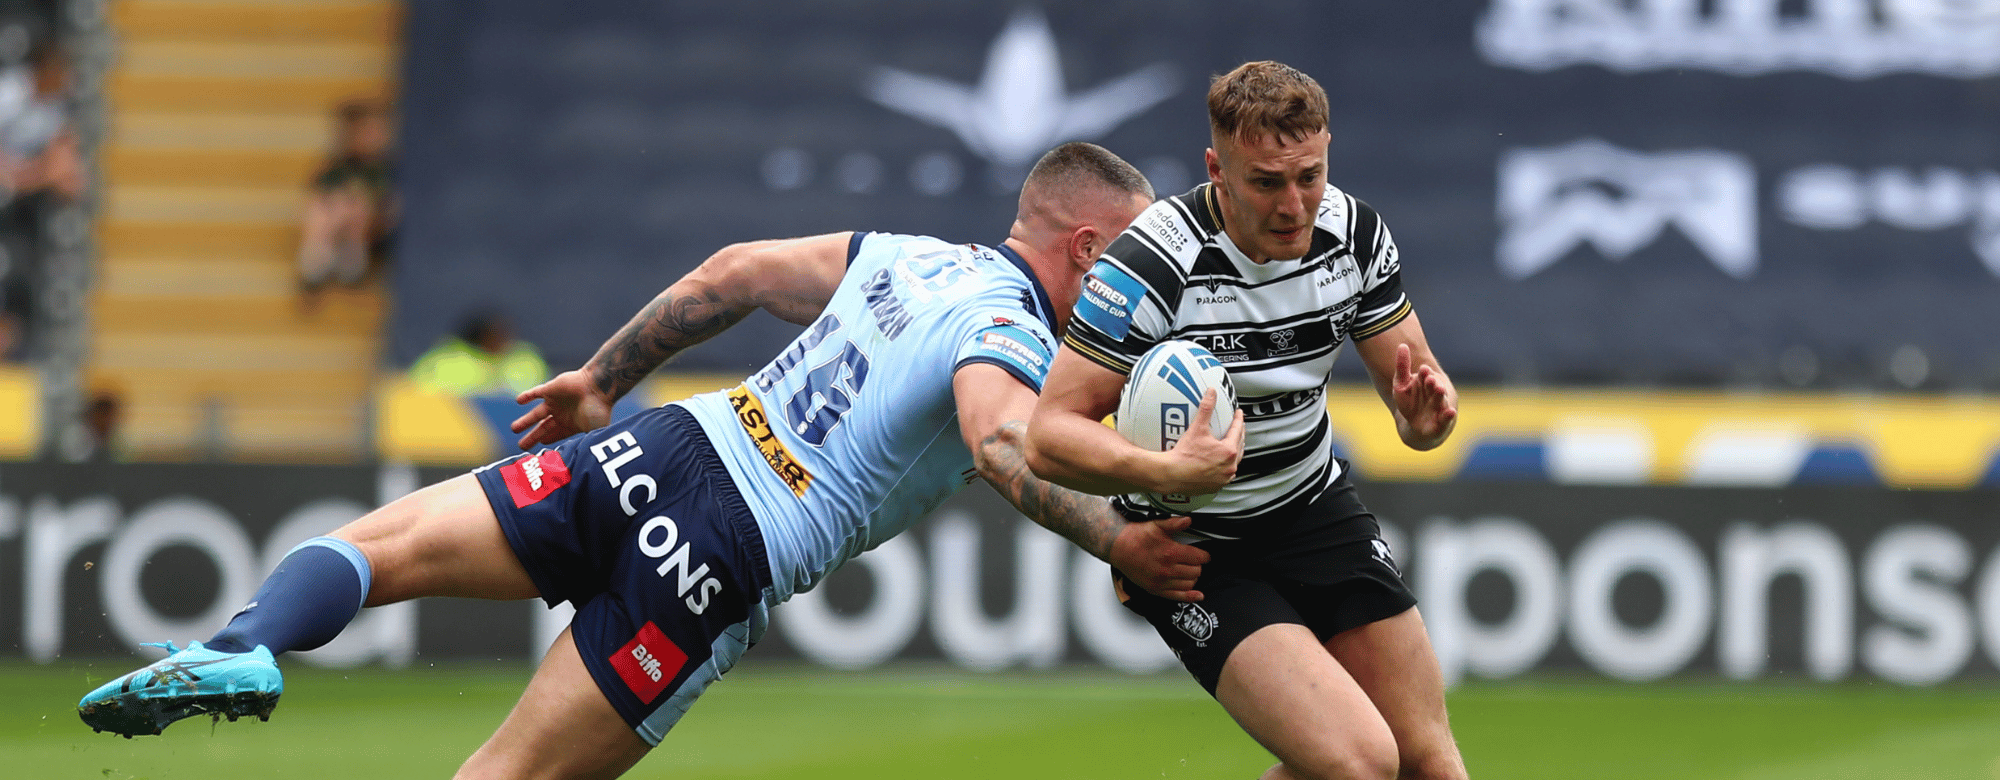 Match Report: Hull FC 18-32 St Helens